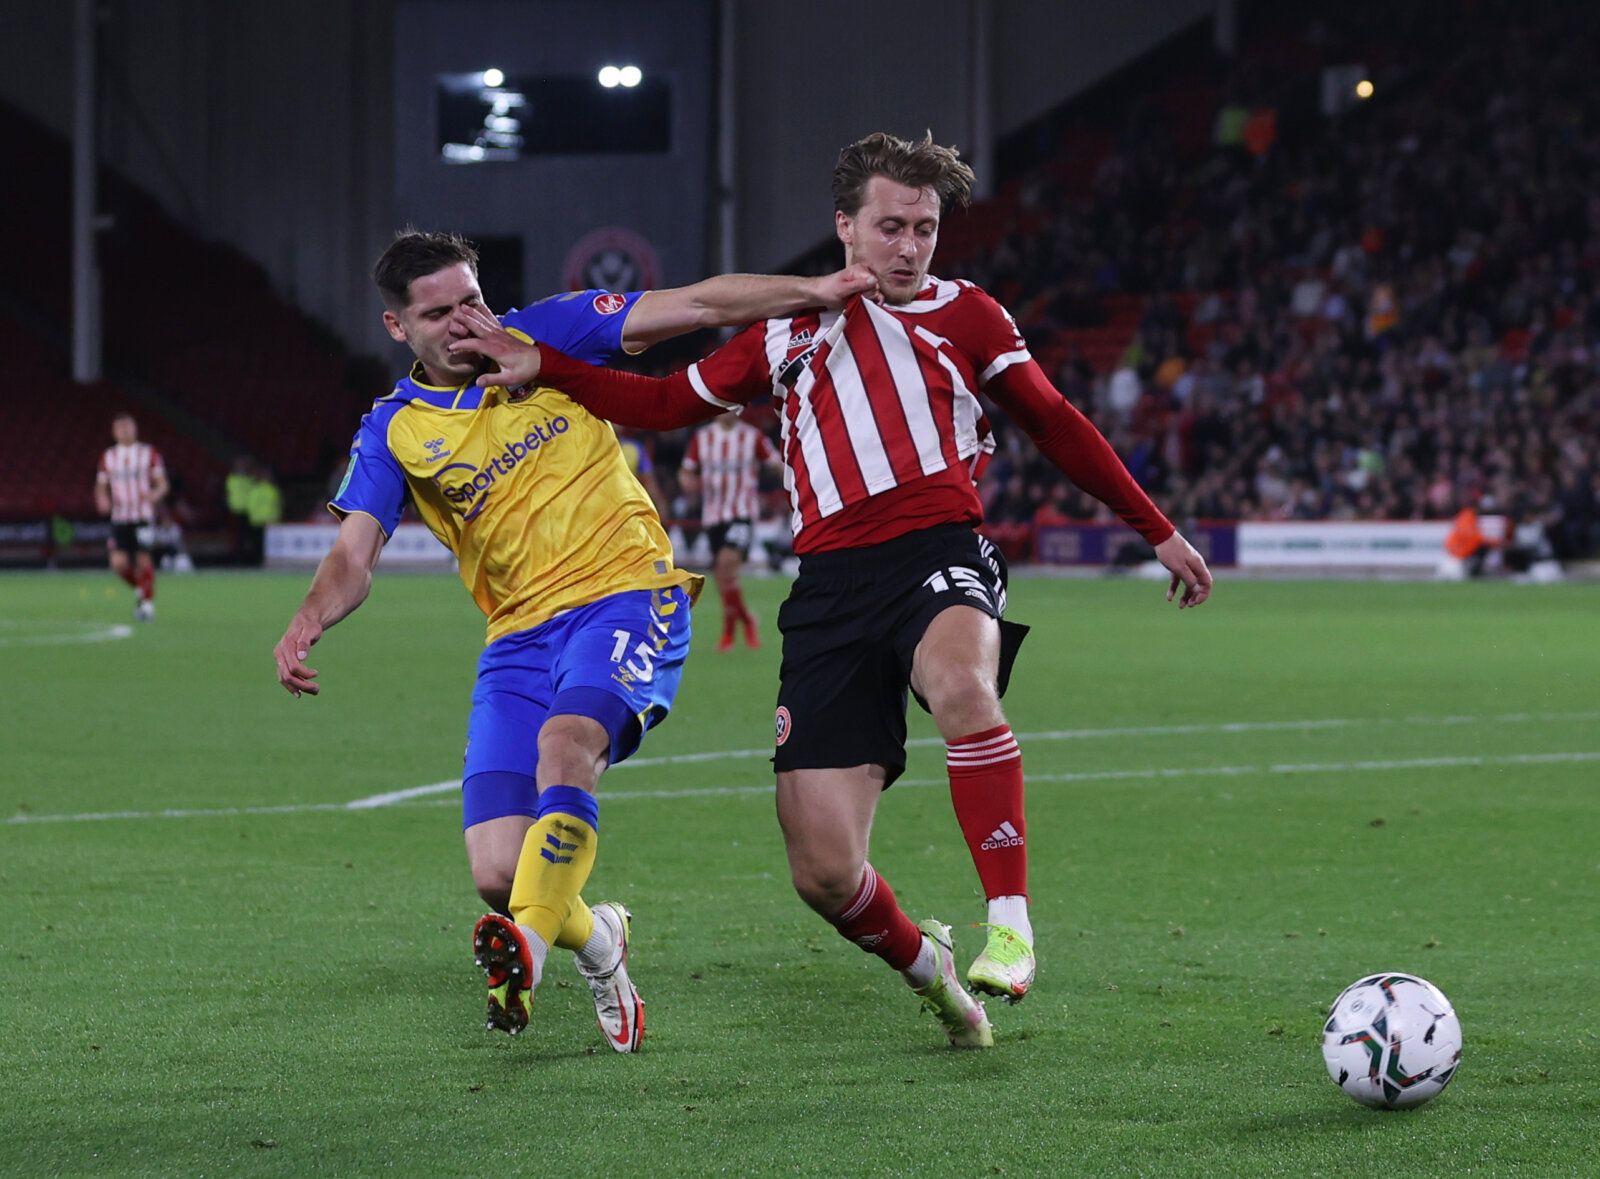 Soccer Football - Carabao Cup - Third Round - Sheffield United v Southampton - Bramall Lane, Sheffield, Britain - September 21, 2021 Southampton's Romain Perraud in action with Sheffield United's Luke Freeman Action Images via Reuters/Lee Smith EDITORIAL USE ONLY. No use with unauthorized audio, video, data, fixture lists, club/league logos or 'live' services. Online in-match use limited to 75 images, no video emulation. No use in betting, games or single club /league/player publications.  Pleas